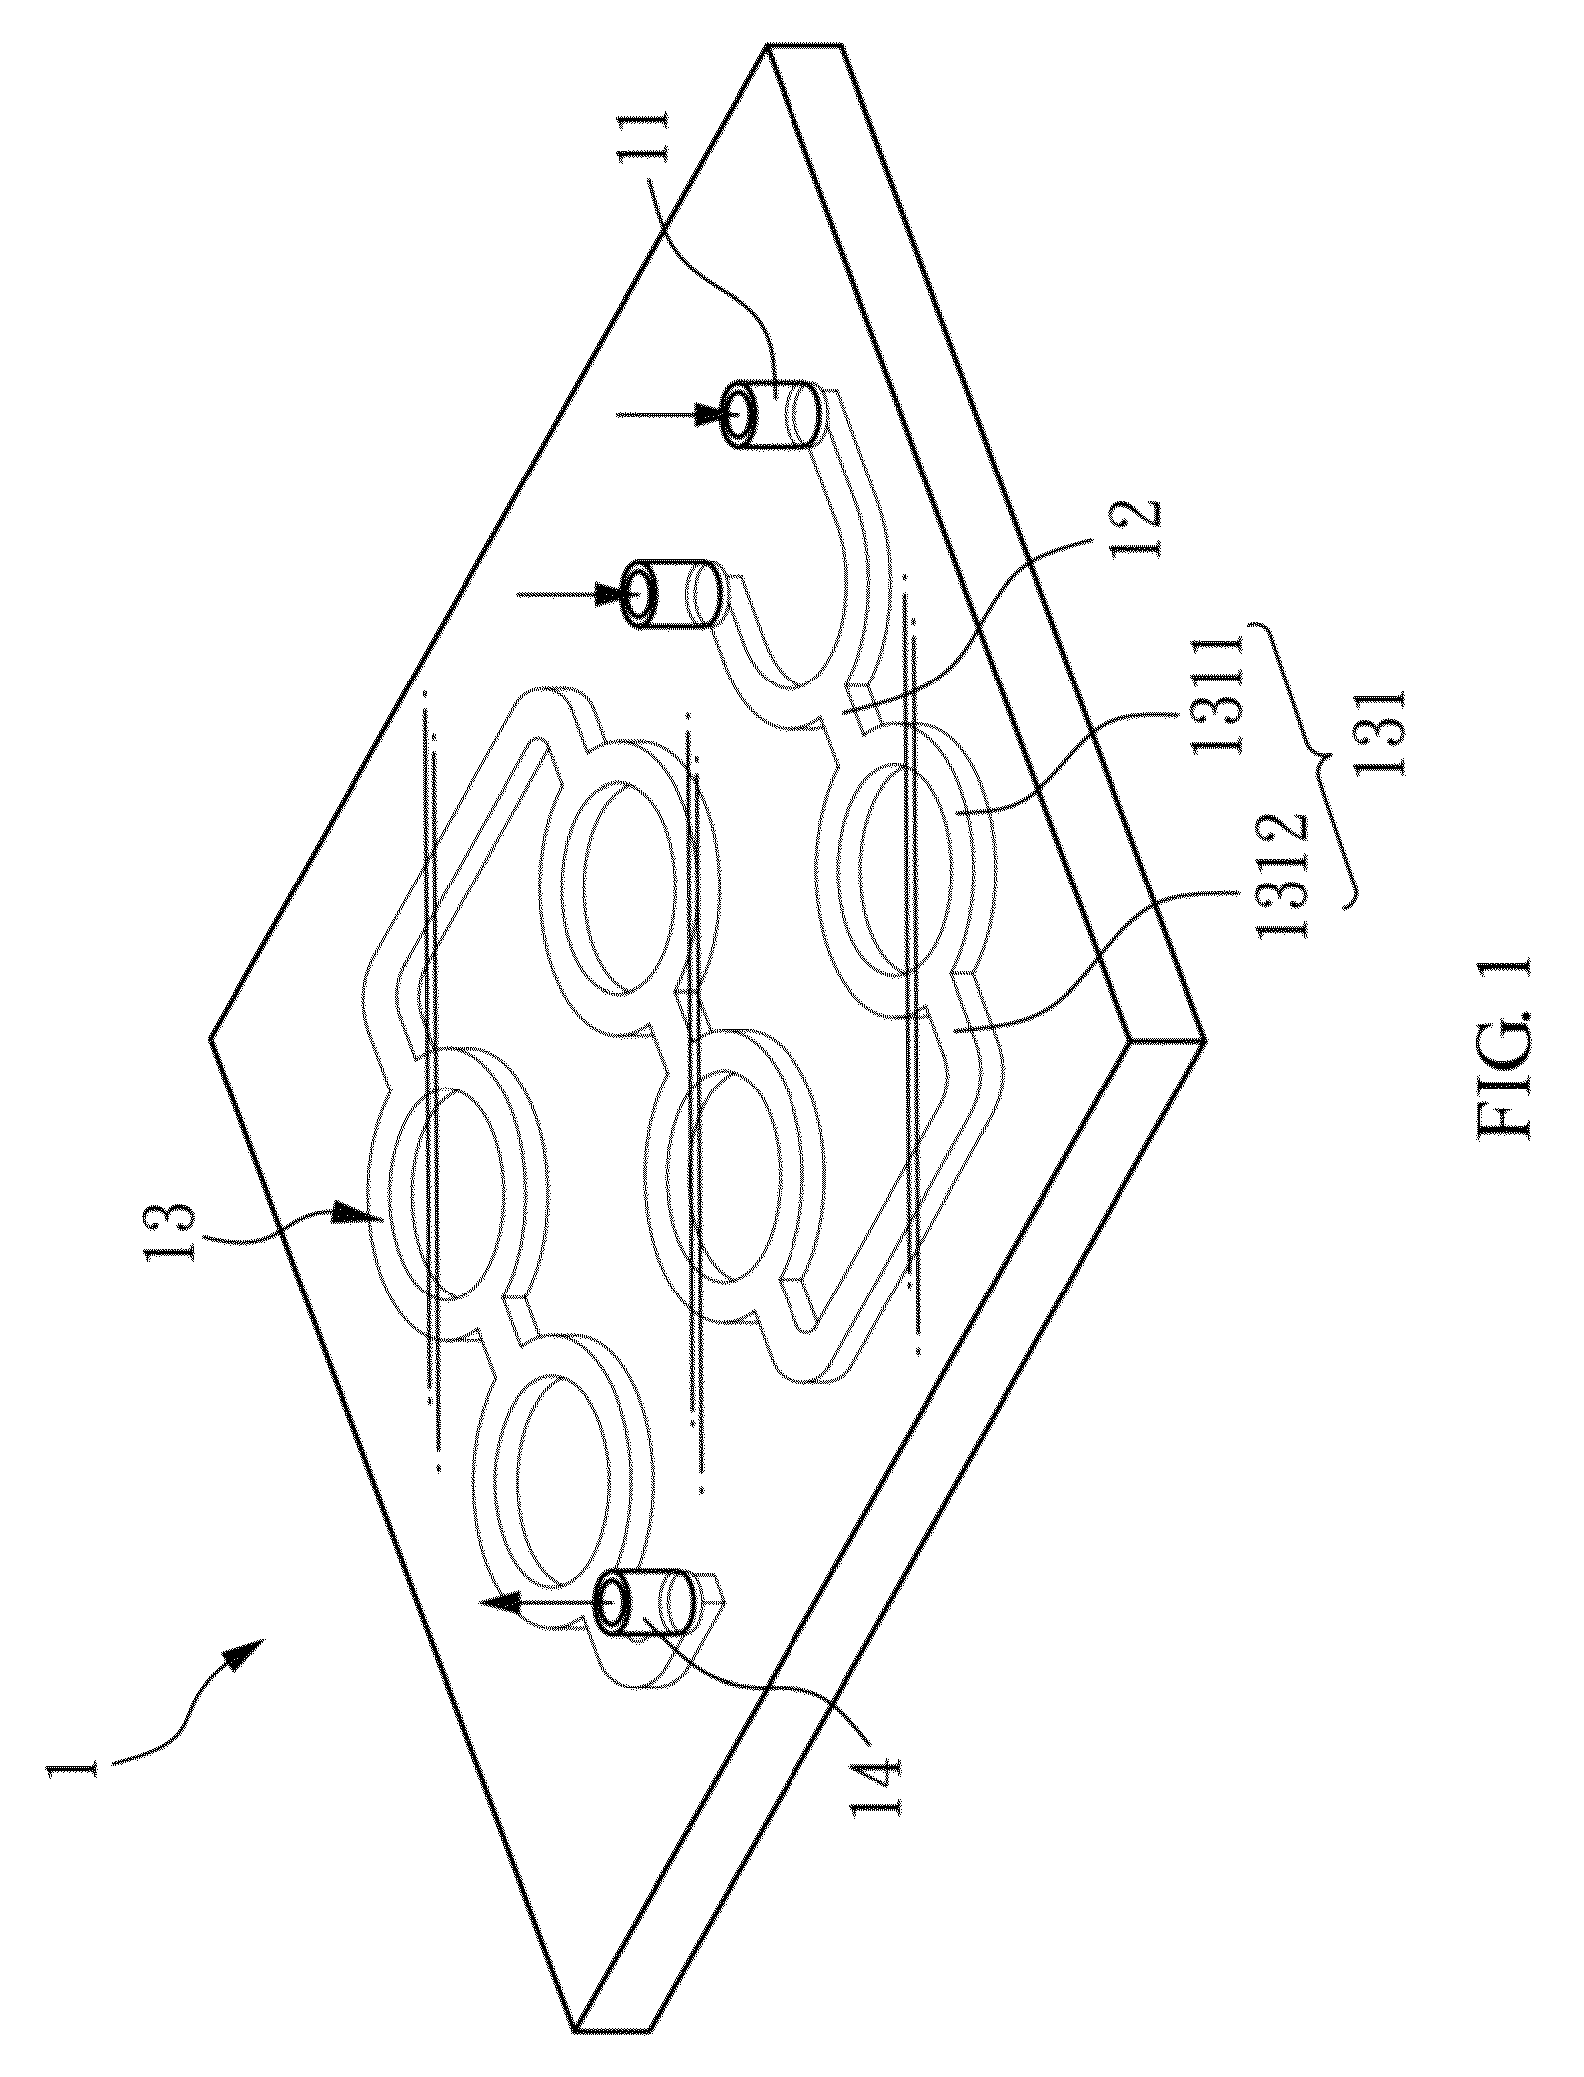 Continuous reactor and method for manufacturing nanoparticles